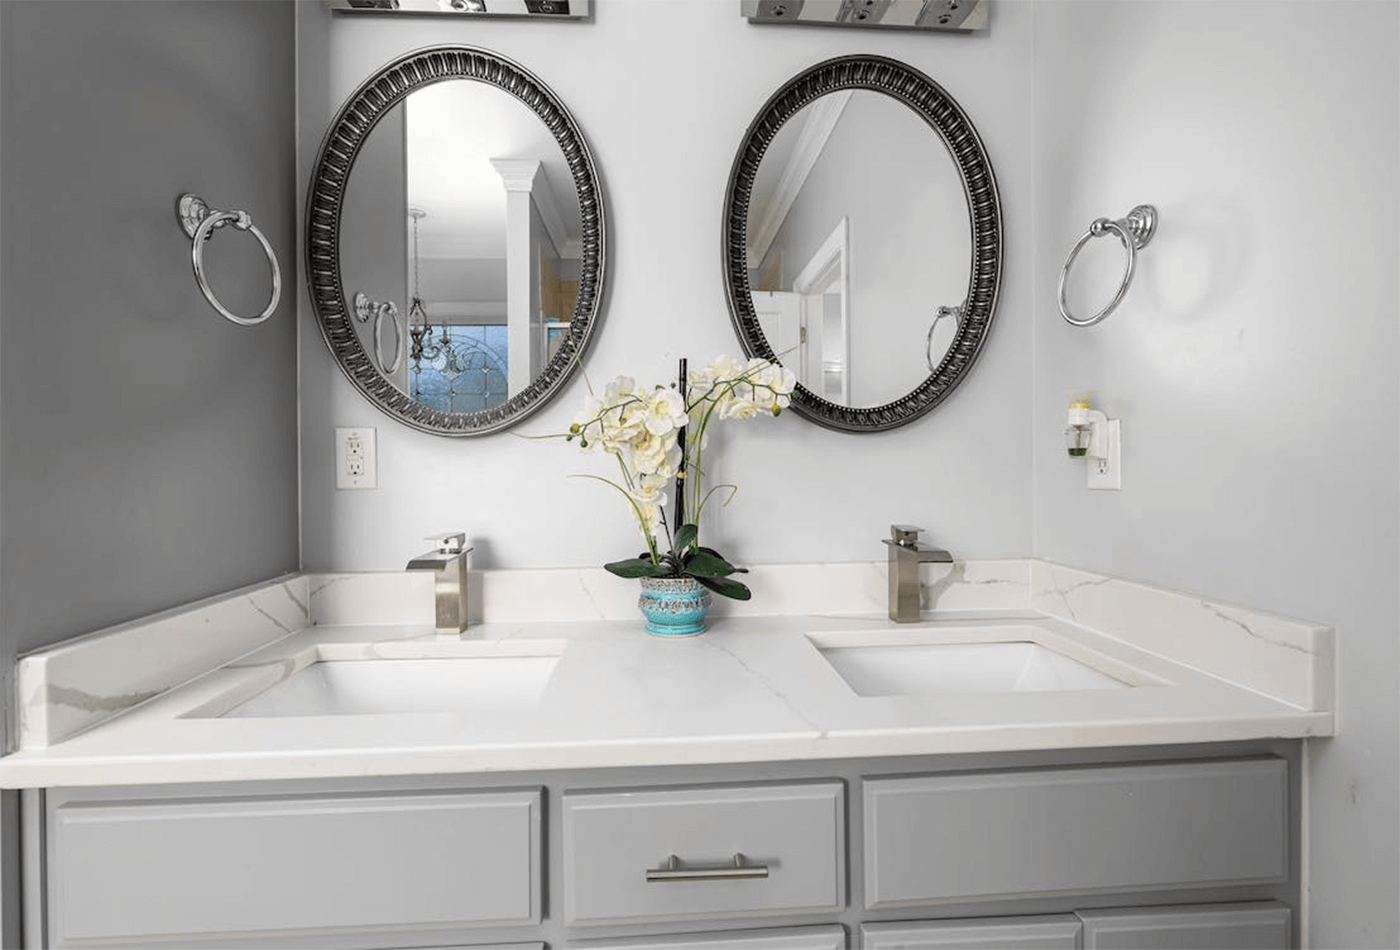 Bathroom Sink Countertop Stupendous Advantages And Styles 